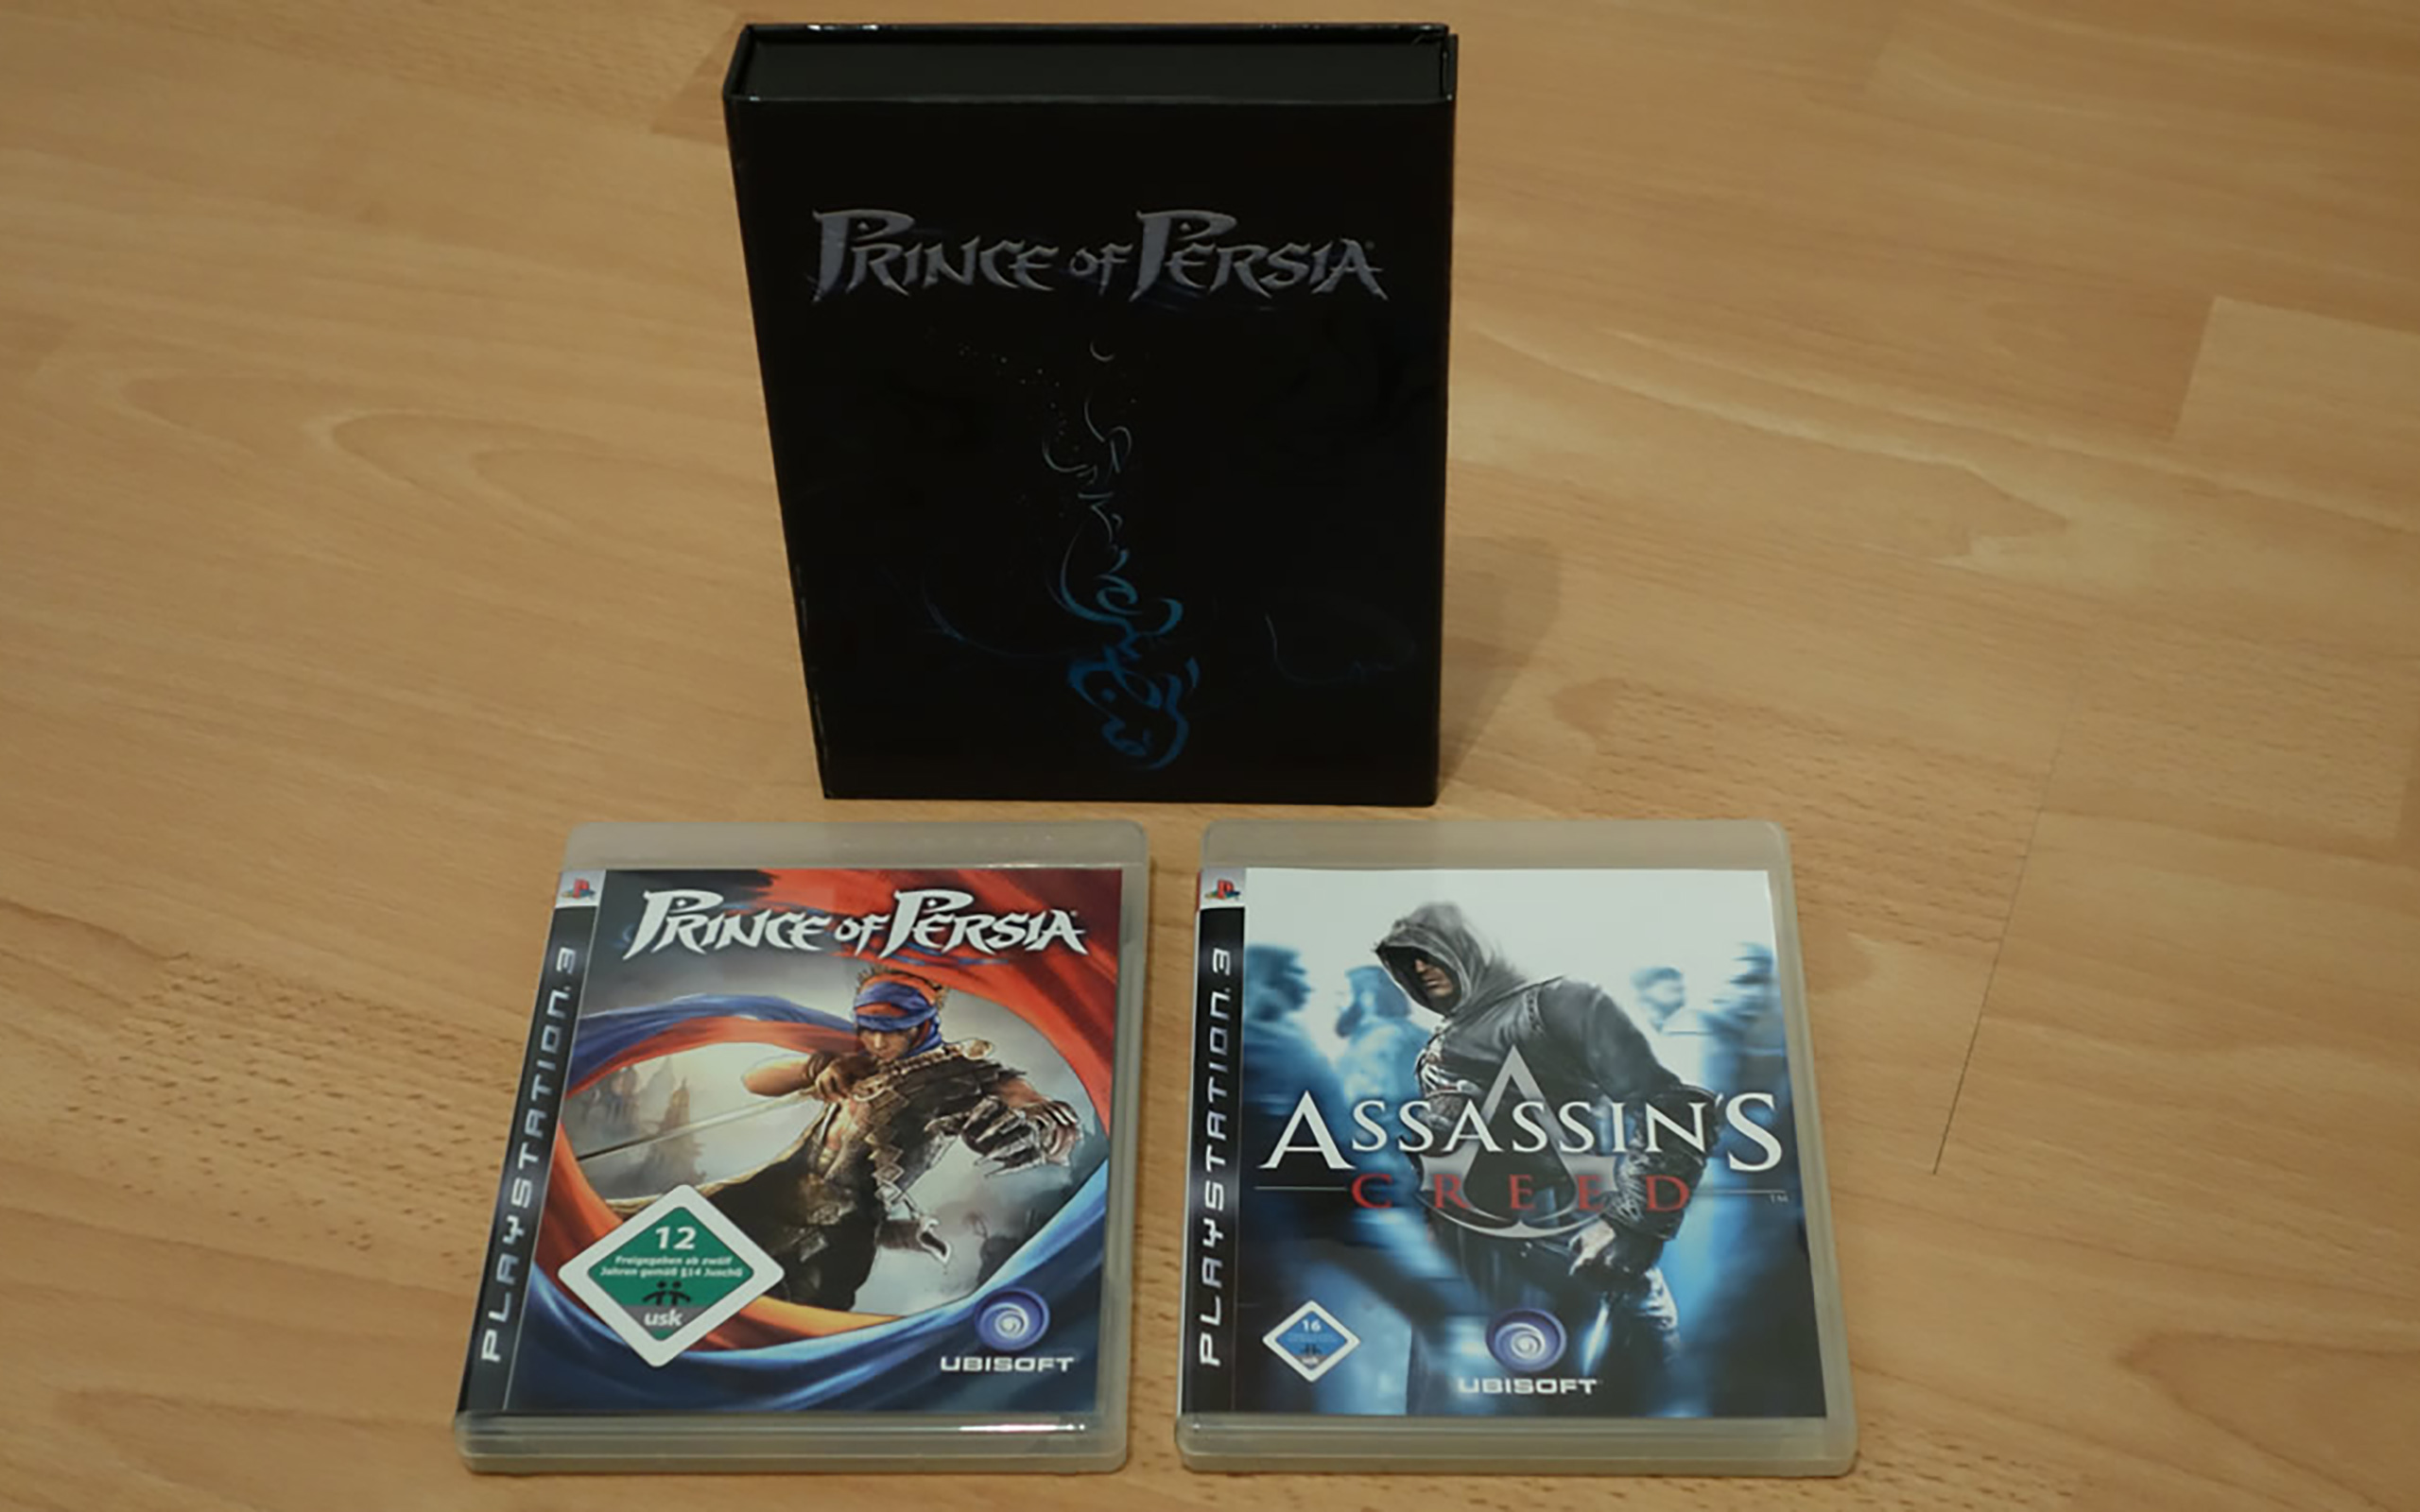 Prince of Persia 2008 Special Edition